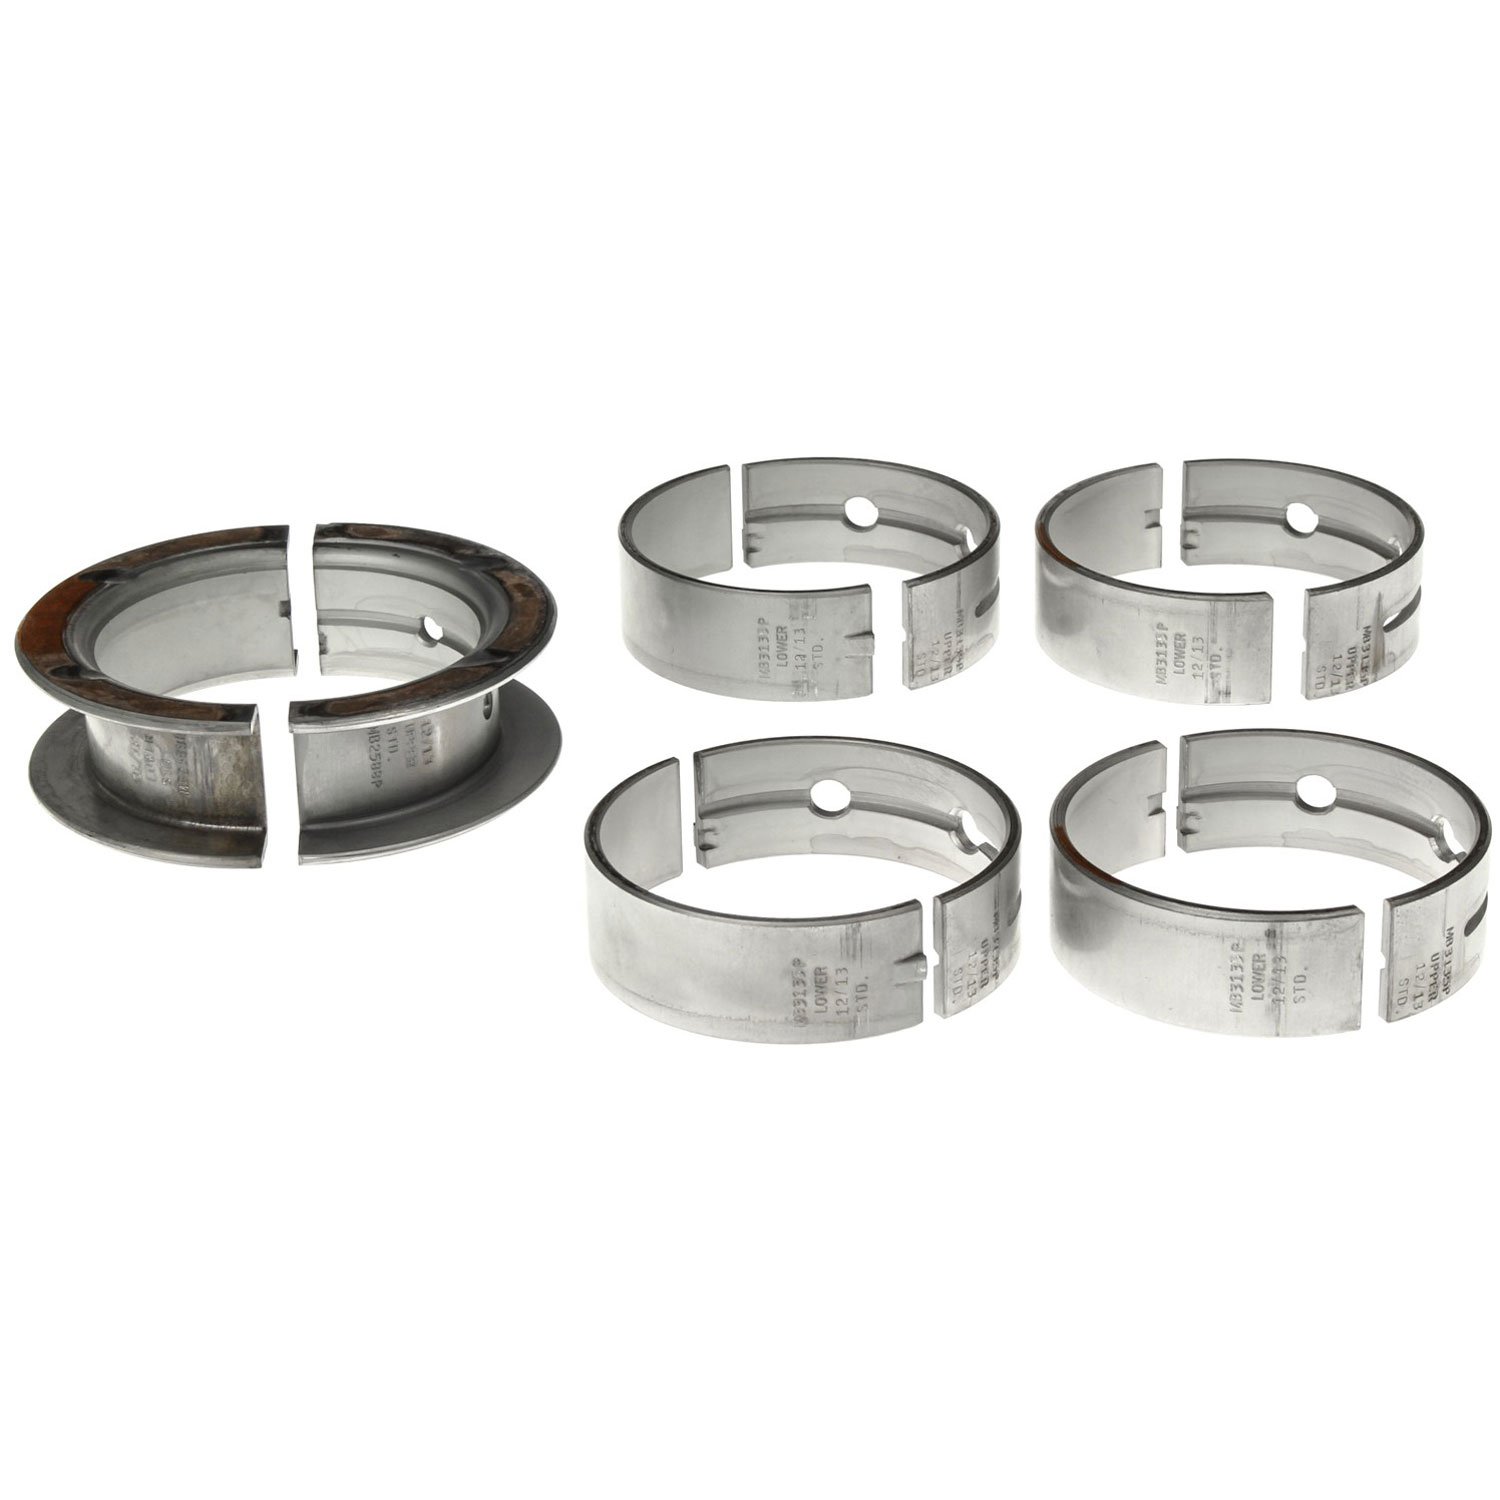 Main Bearing Set For 2008-2010 Ford F-250, F-350,